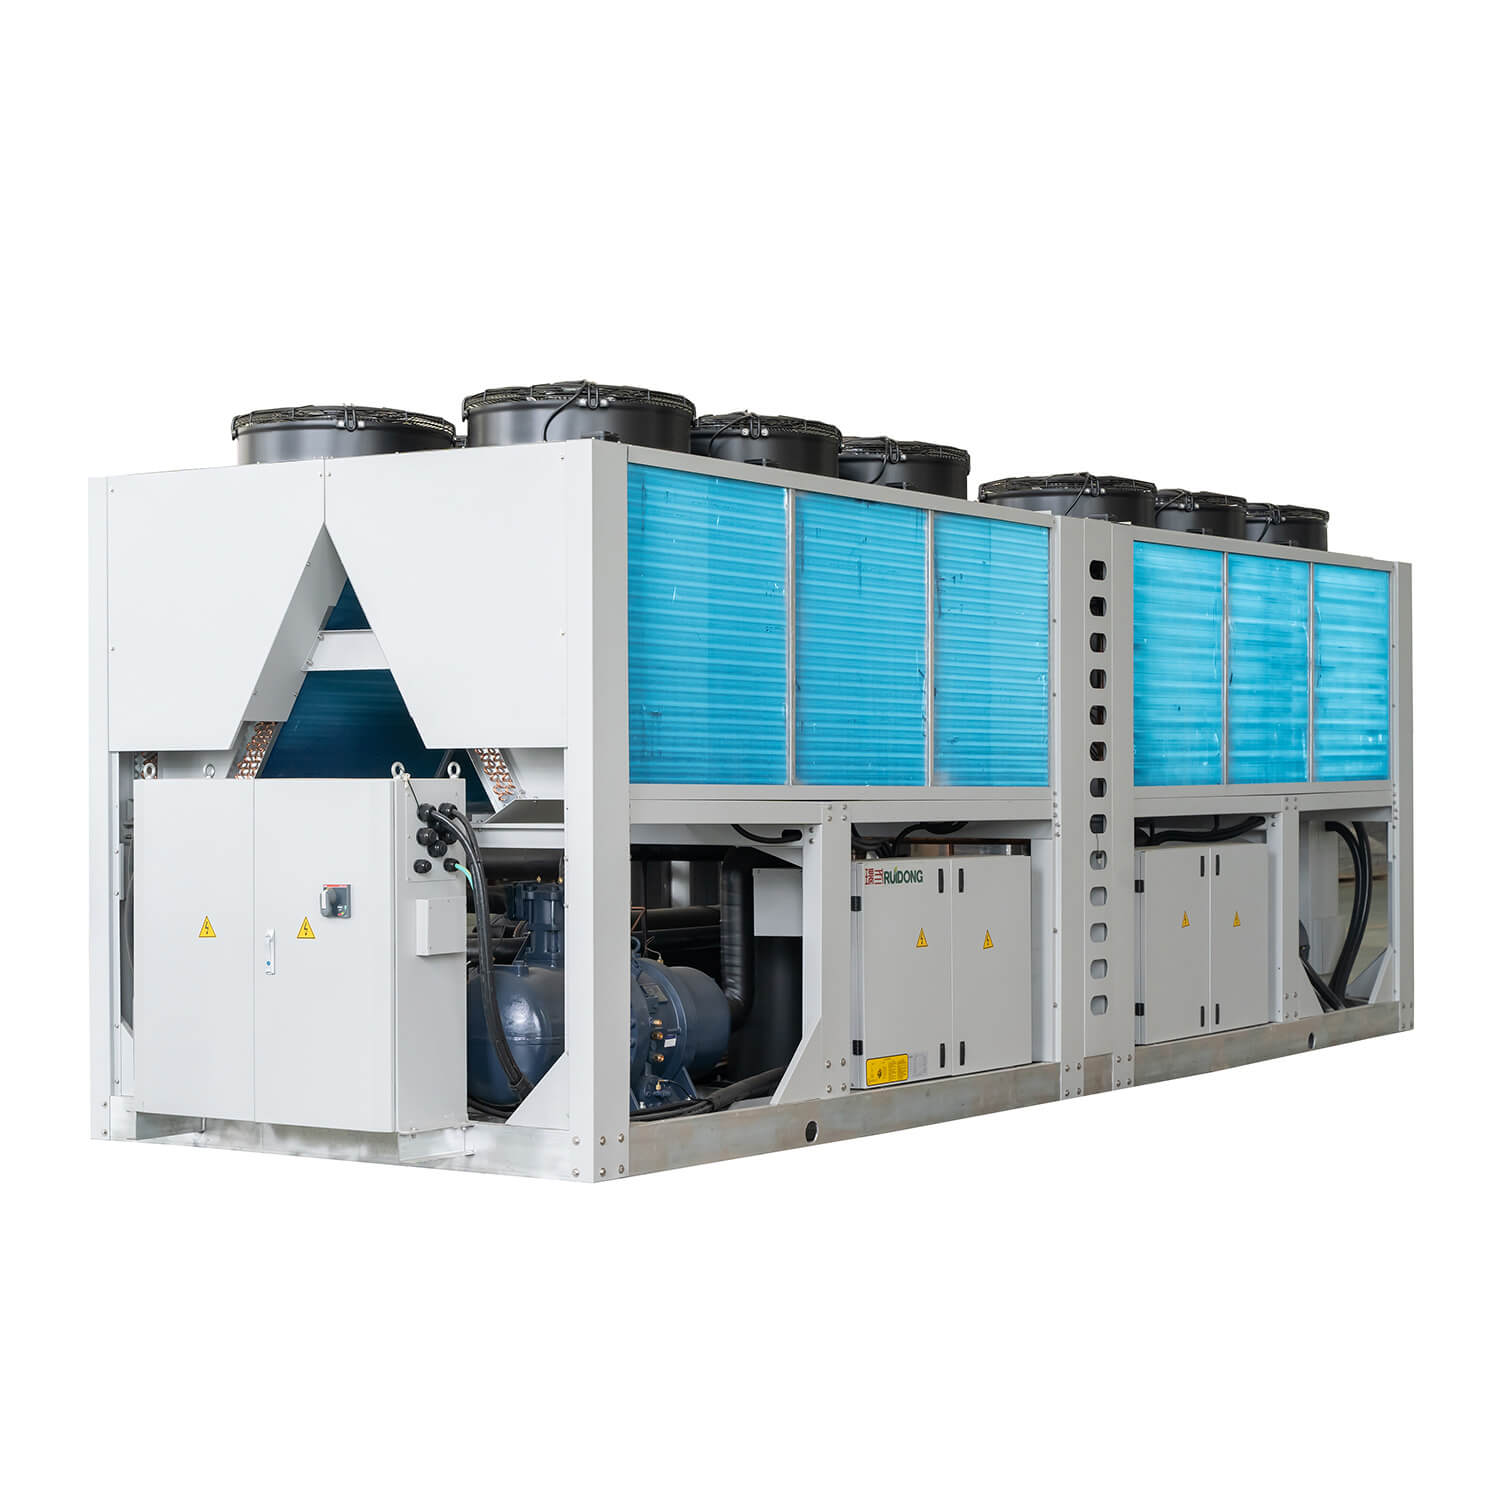 Air Cooled Screw Chiller and Heat Pump, 280kW-1120kW